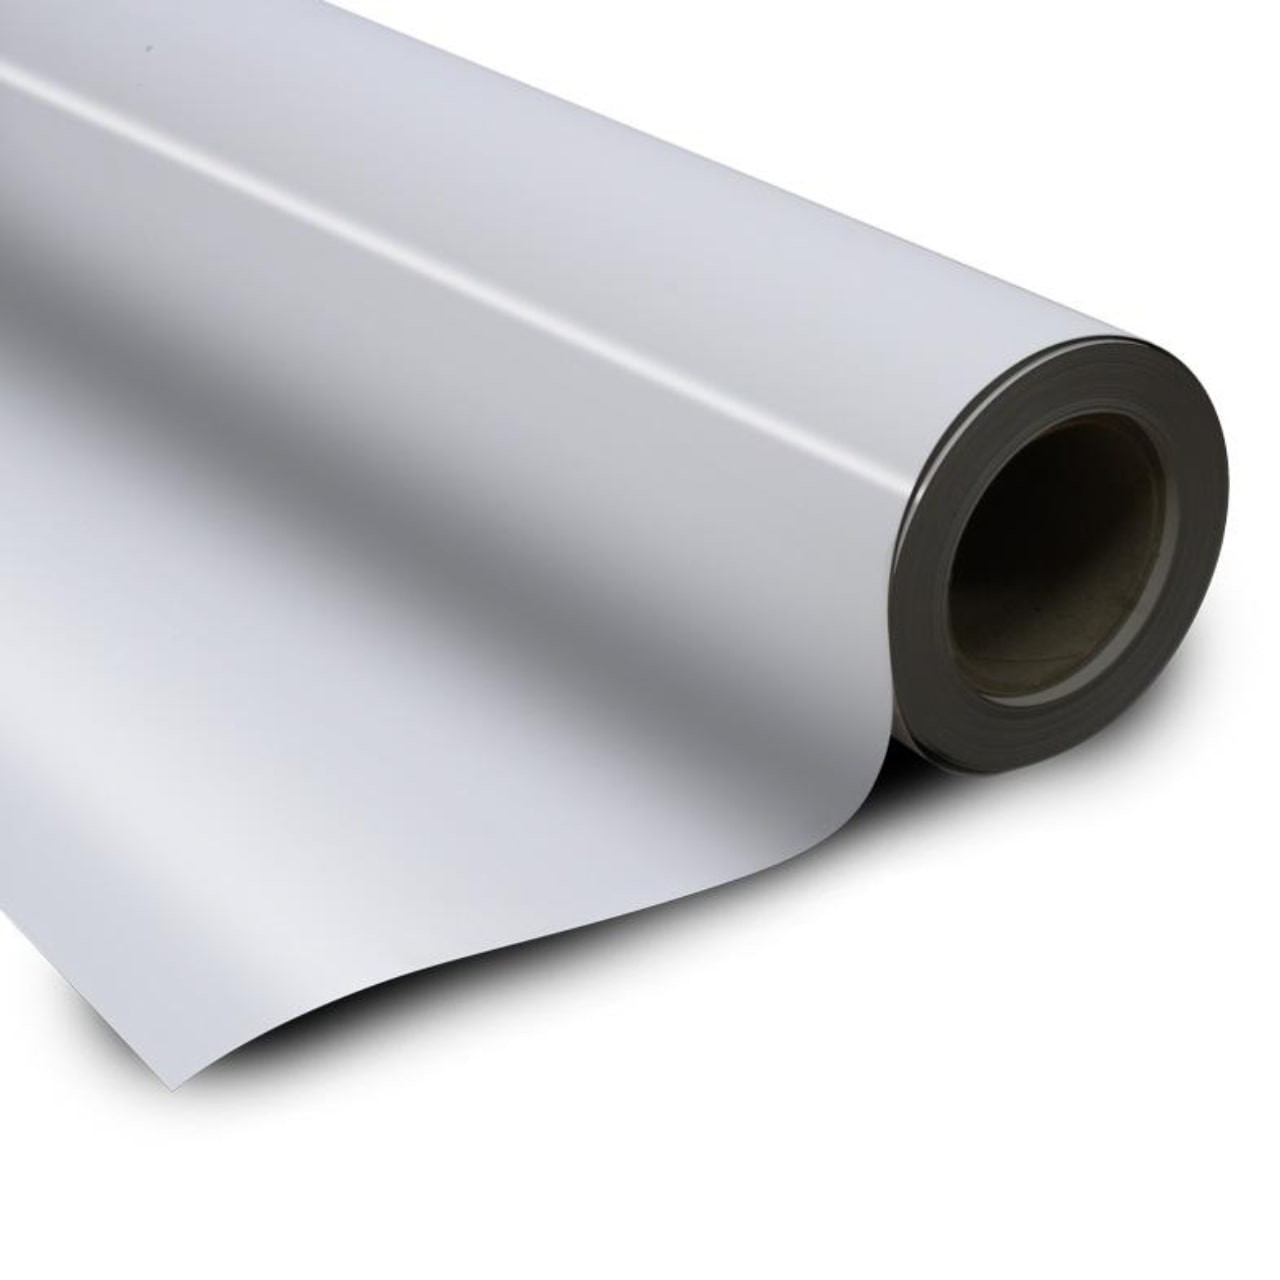 Magnetic Vinyl Adhesive, Featured Products